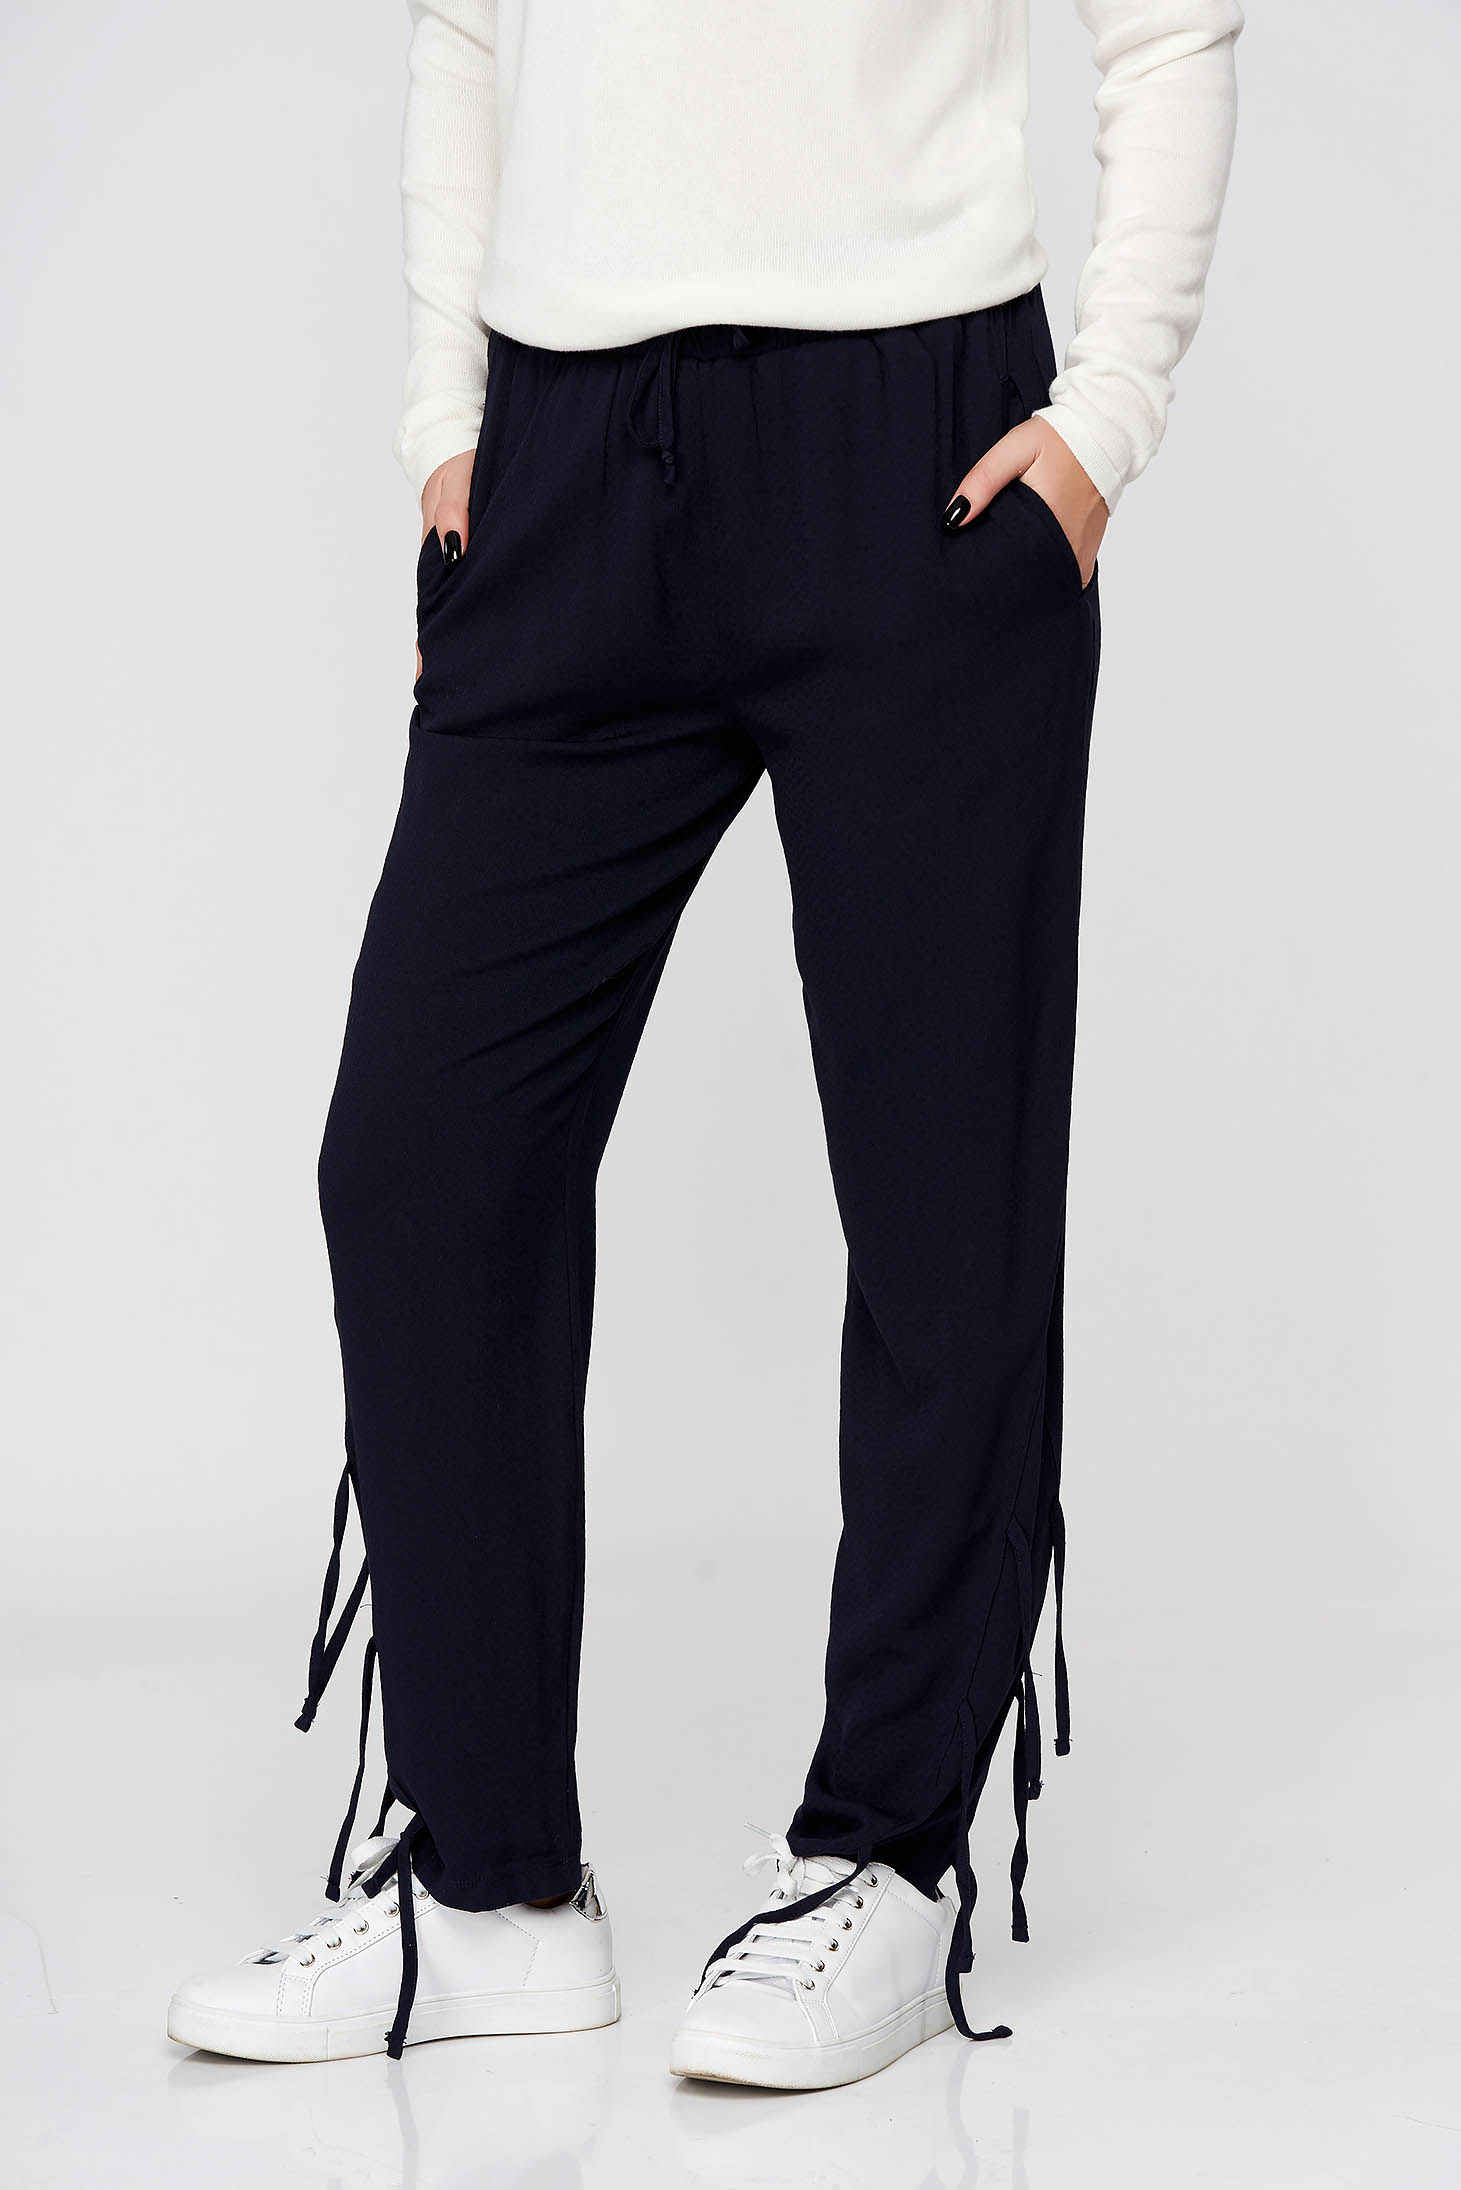 Darkblue trousers with easy cut with elastic waist high waisted airy fabric with laced details